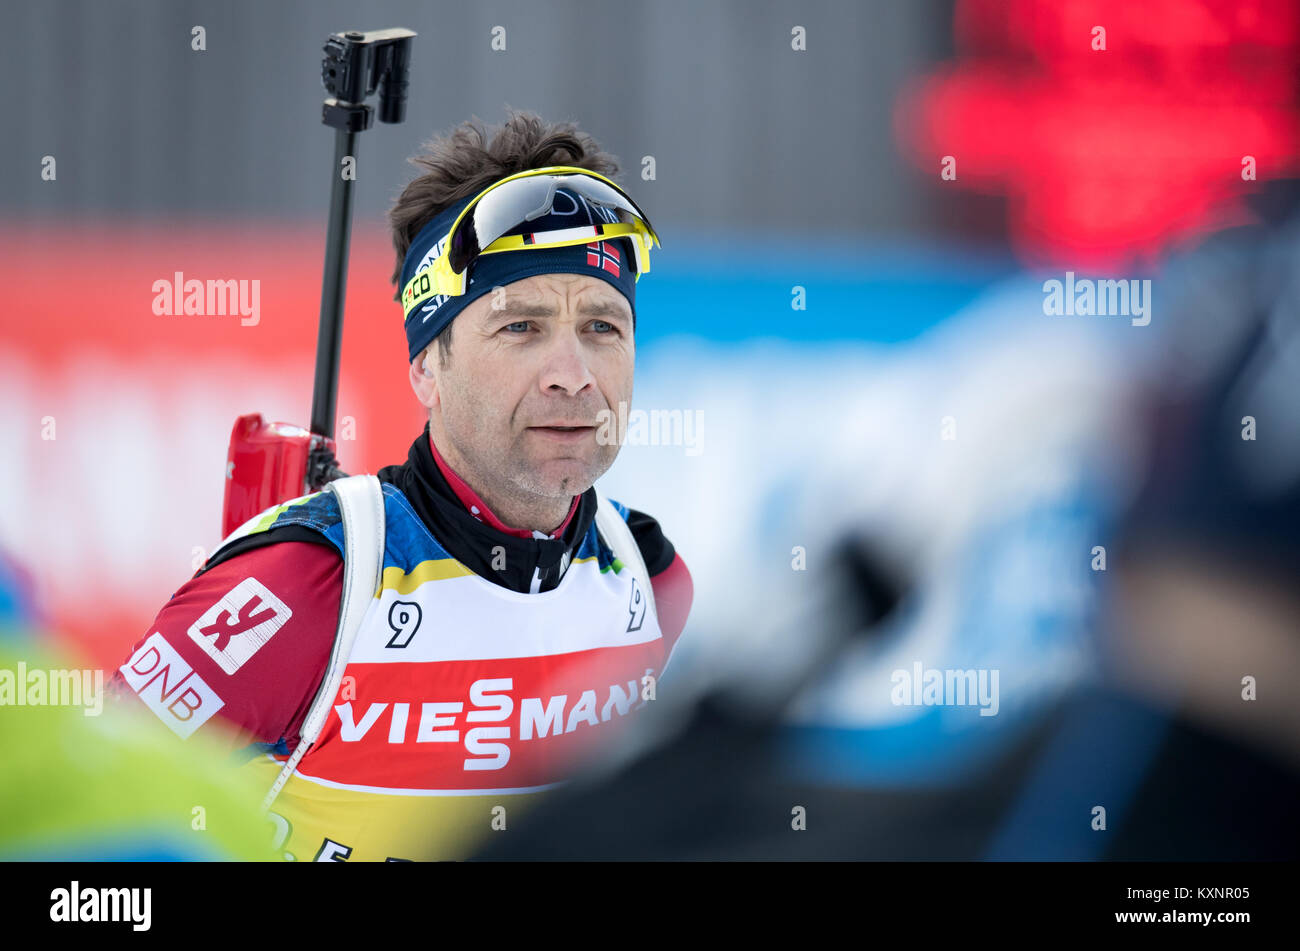 Ruhpolding, Germany. 11th Jan, 2018. Norwegian biathlete Ole Einar Bjoerndalen during a training session at the Chiemgau Arena in Ruhpolding, Germany, 11 January 2018. Credit: Sven Hoppe/dpa/Alamy Live News Stock Photo